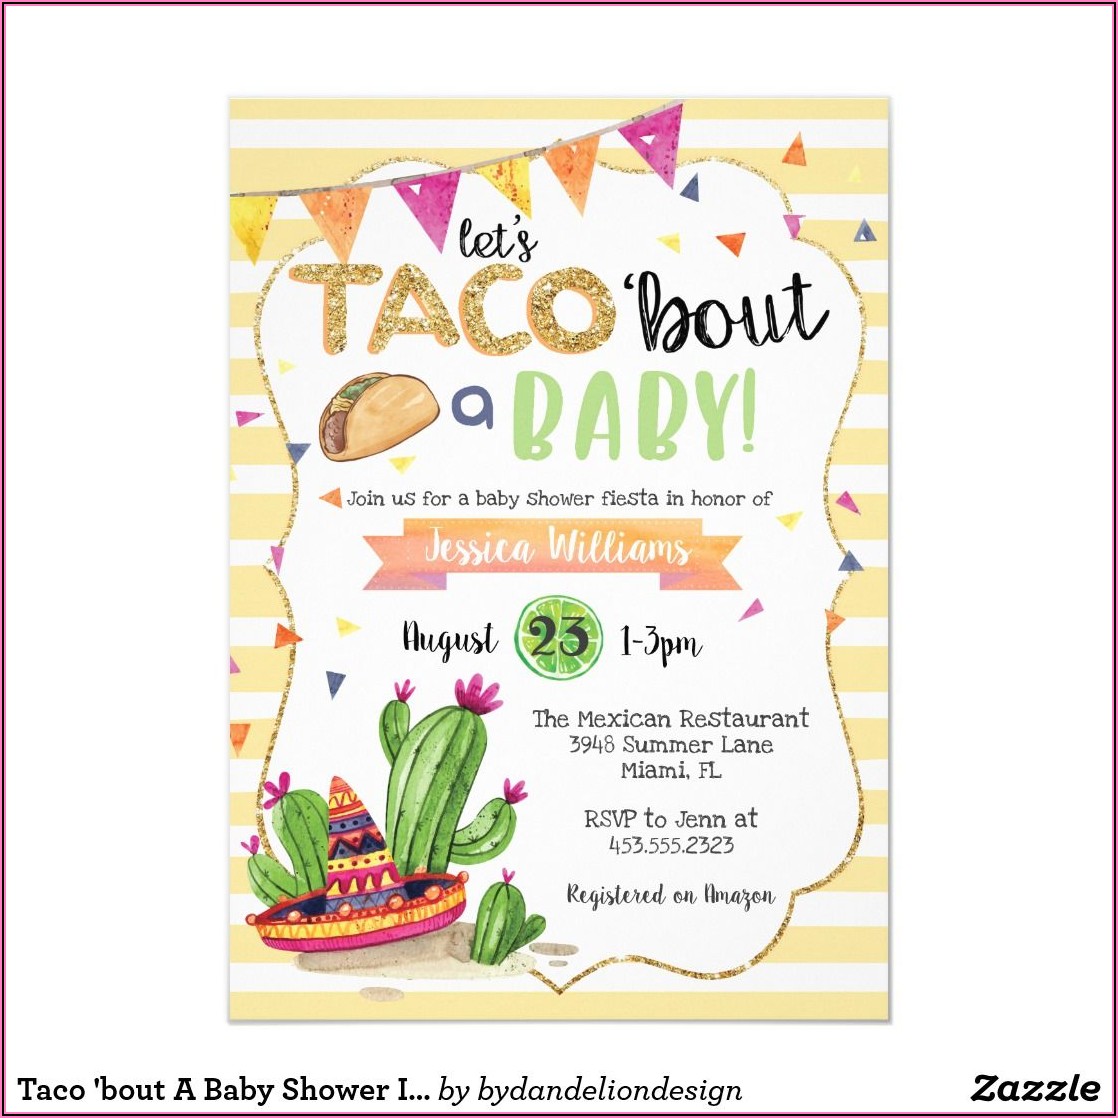 Taco Bout A Baby Invitations